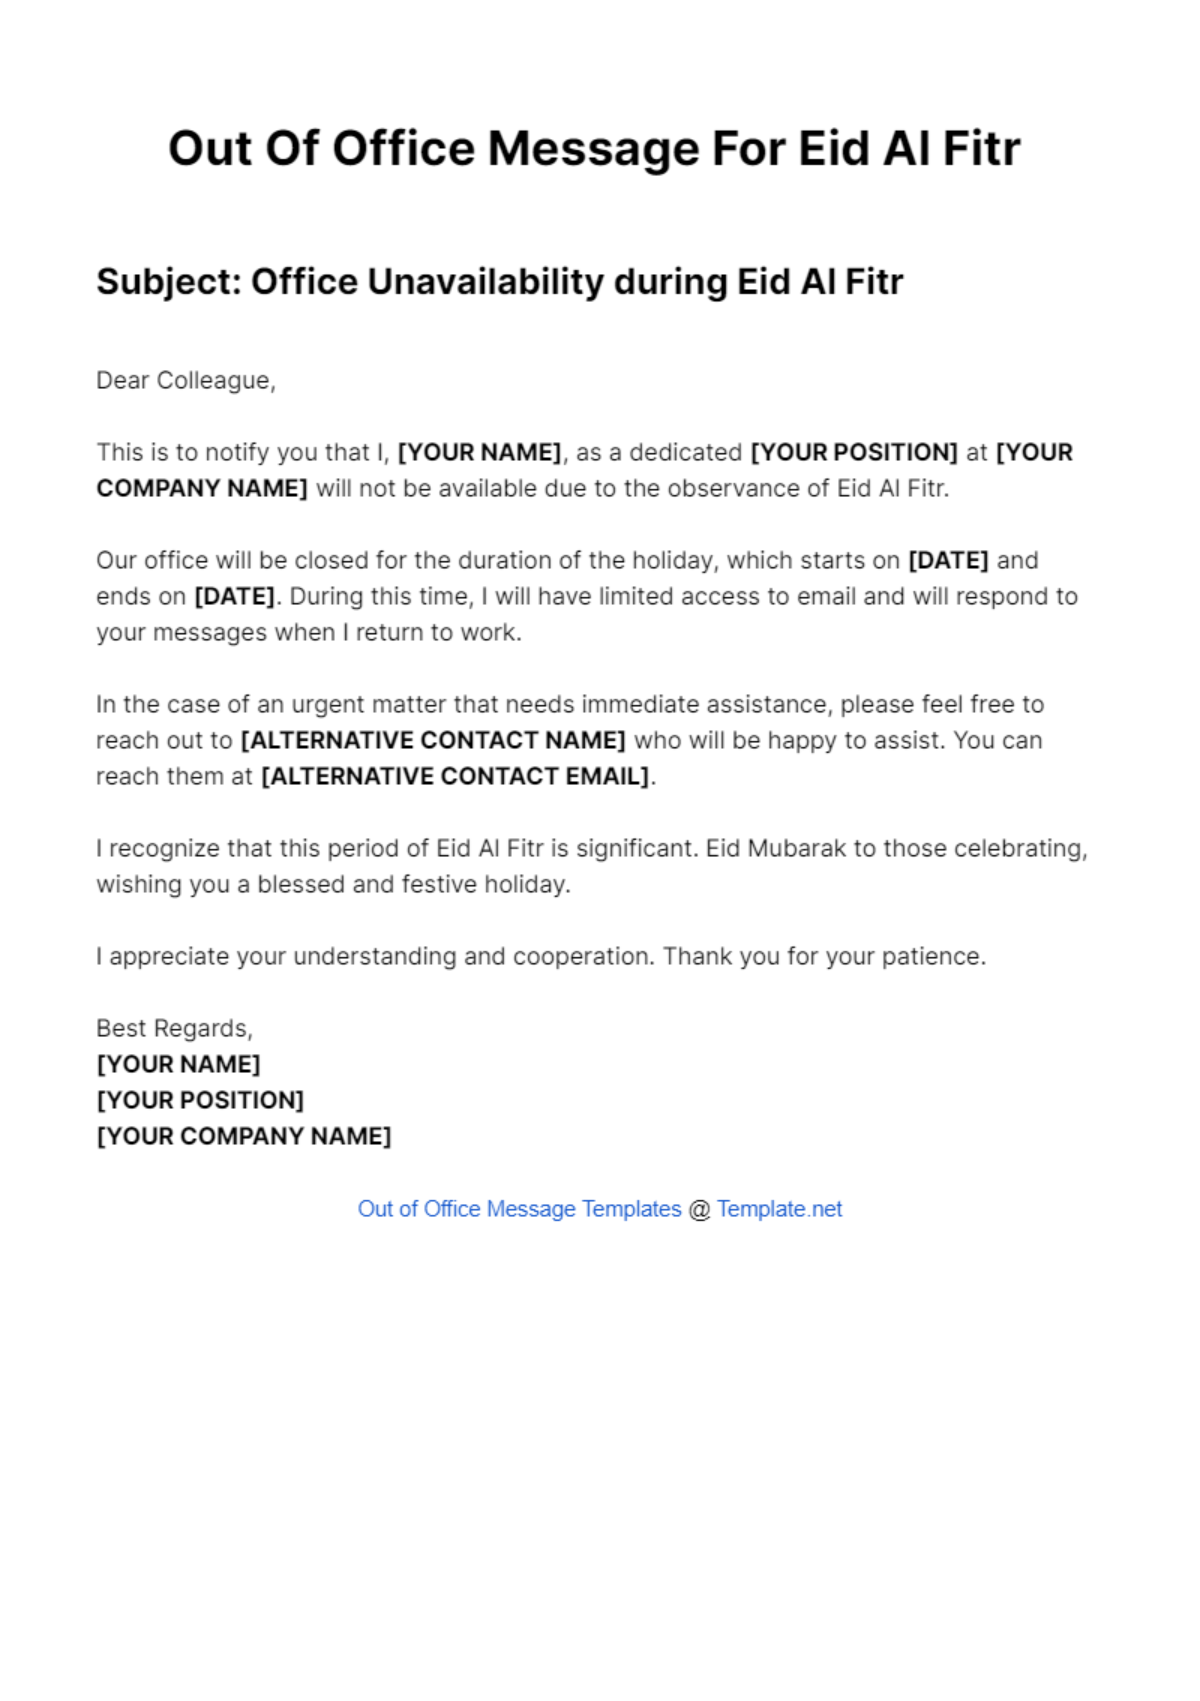 Out Of Office Message For Eid Al Fitr Template